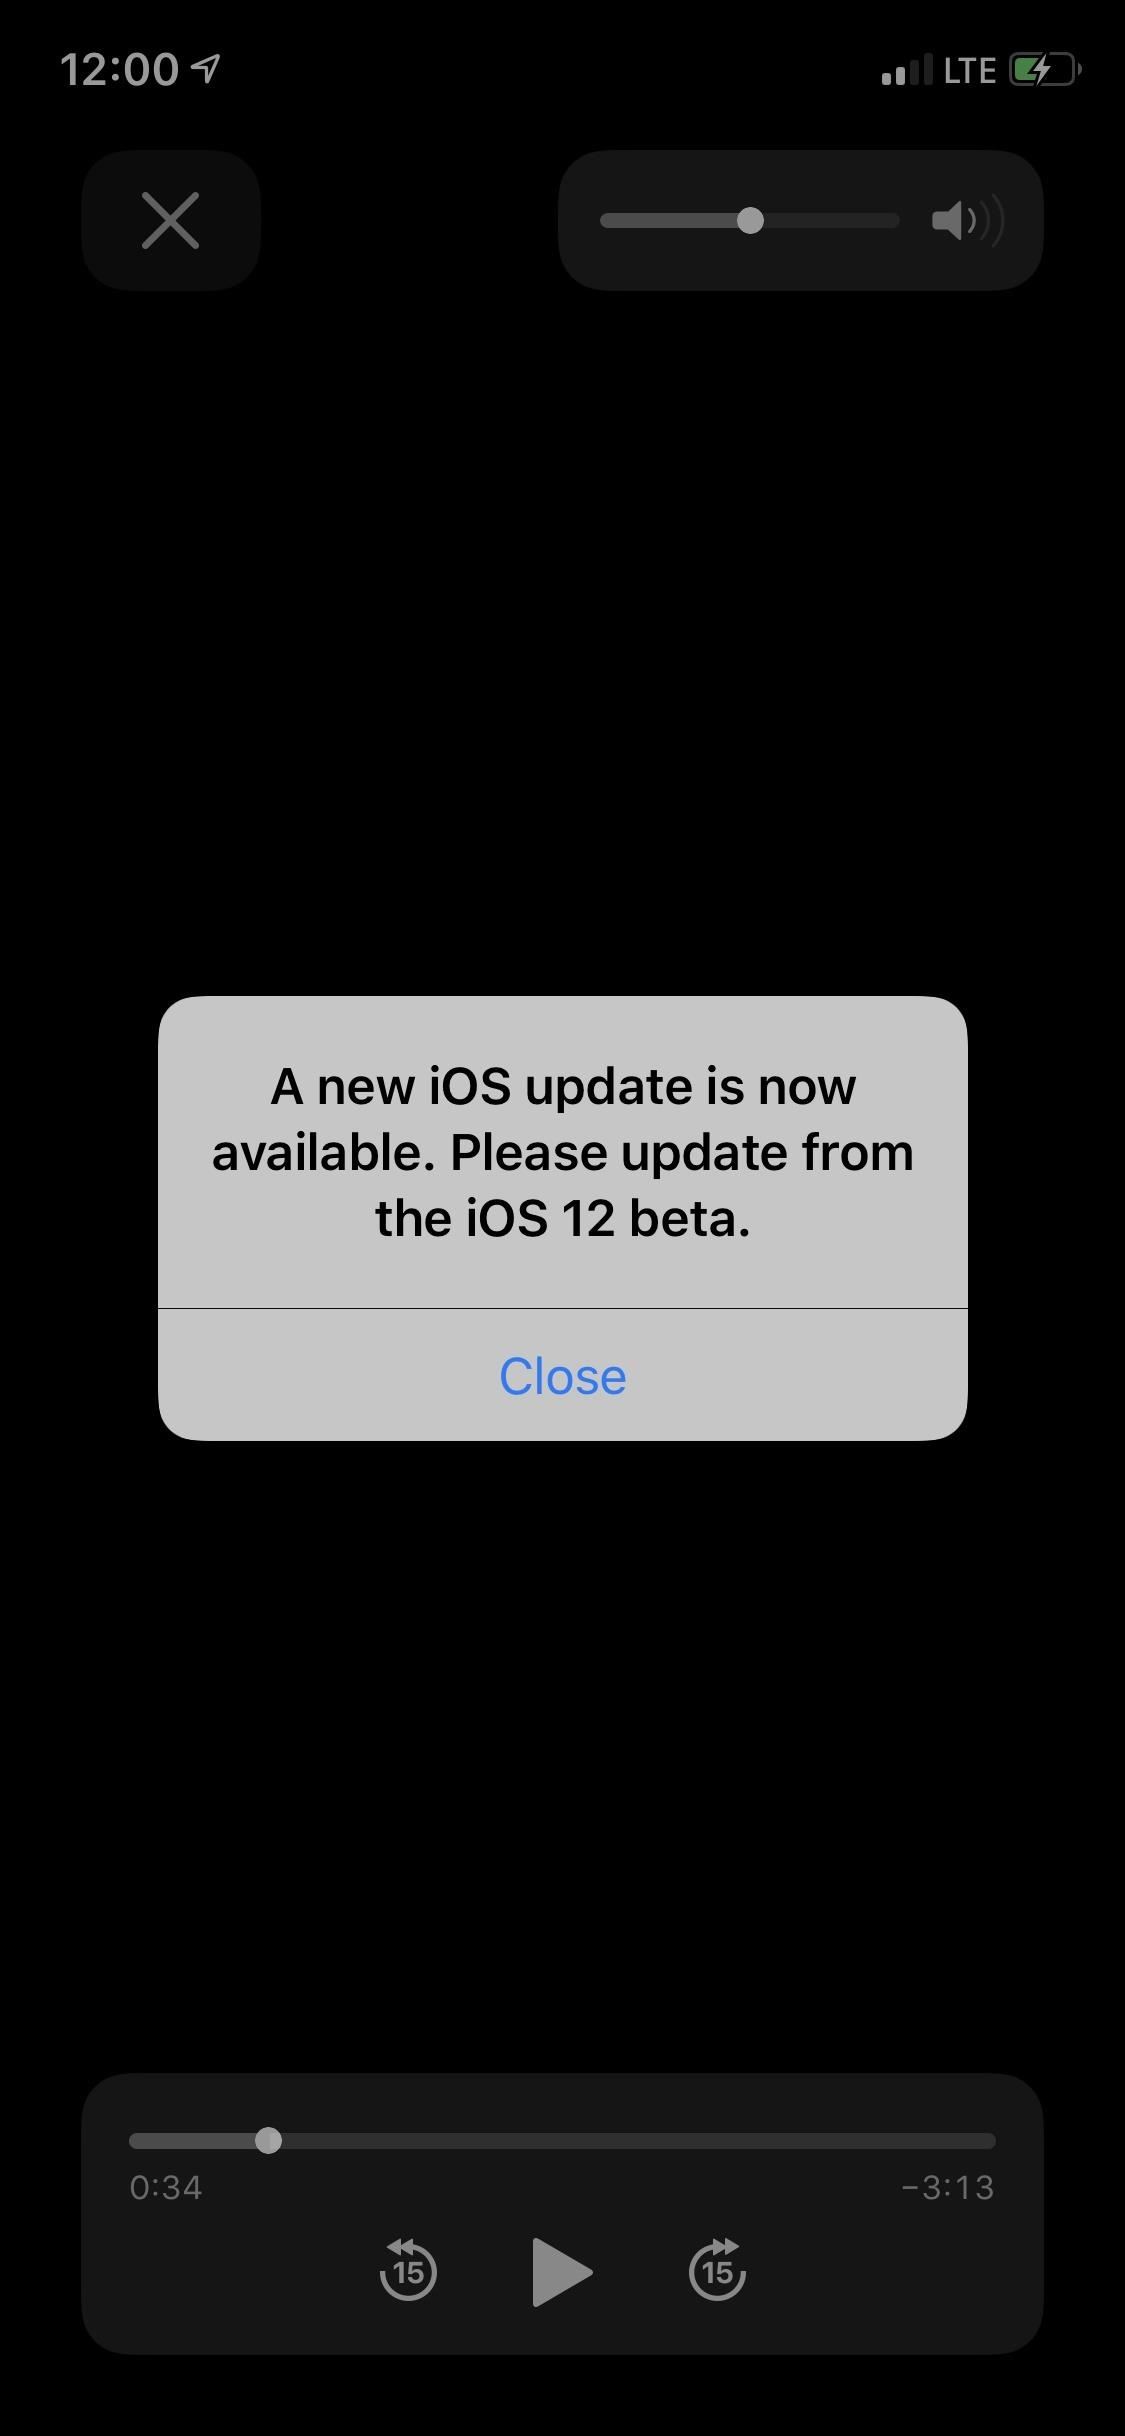 Apple Releases iOS 12 Public Beta 10 for iPhone, Fixes Bug Constantly Telling You to Update